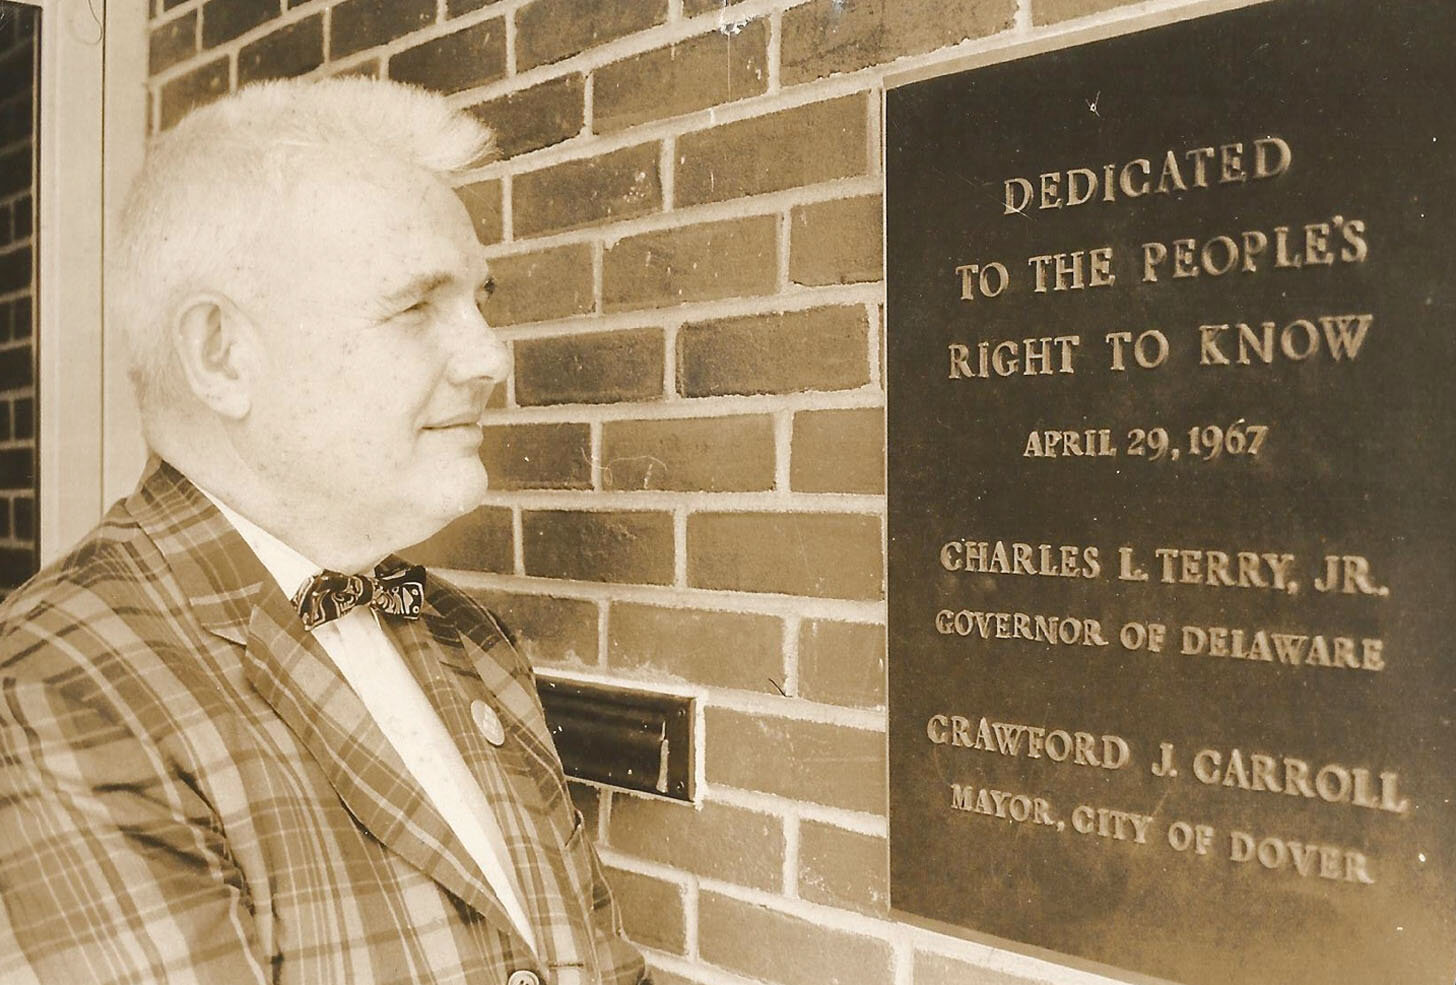 Jack Smyth published the first edition of the Delaware State News in 1953. Shown here, he celebrated the opening of a new Dover office and offset printing plan in 1967.